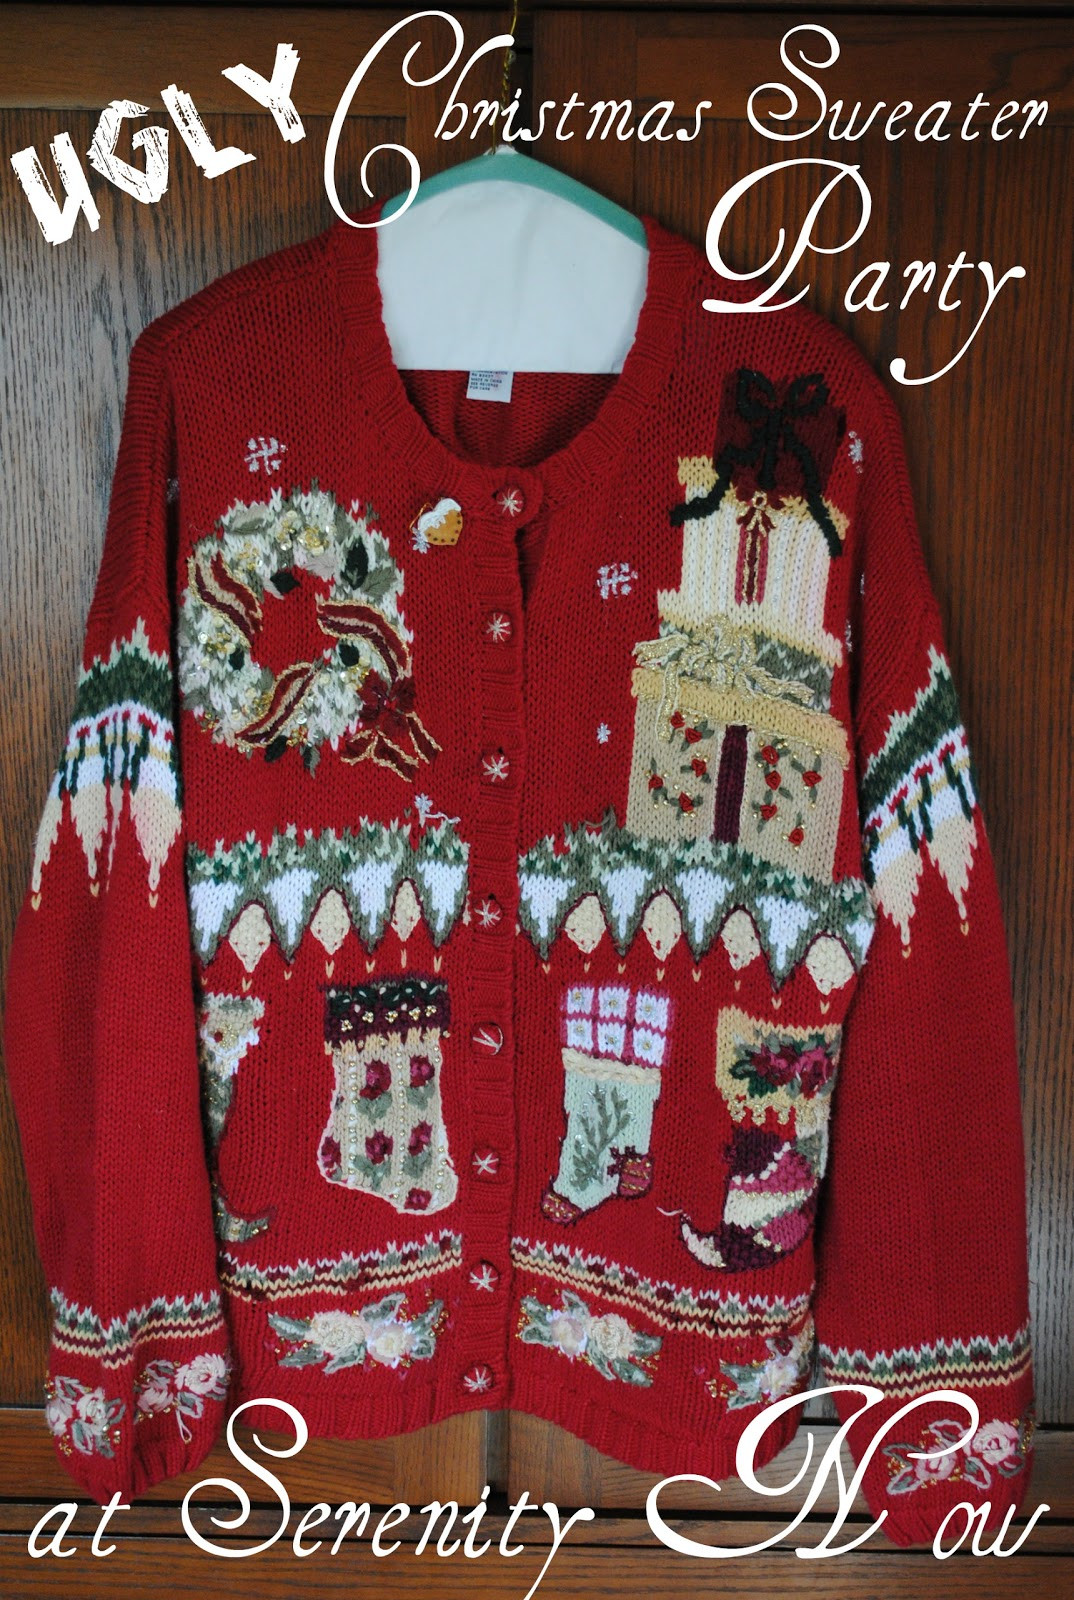 Christmas Sweater Ideas For A Party
 Serenity Now How to Throw an Ugly Christmas Sweater Party